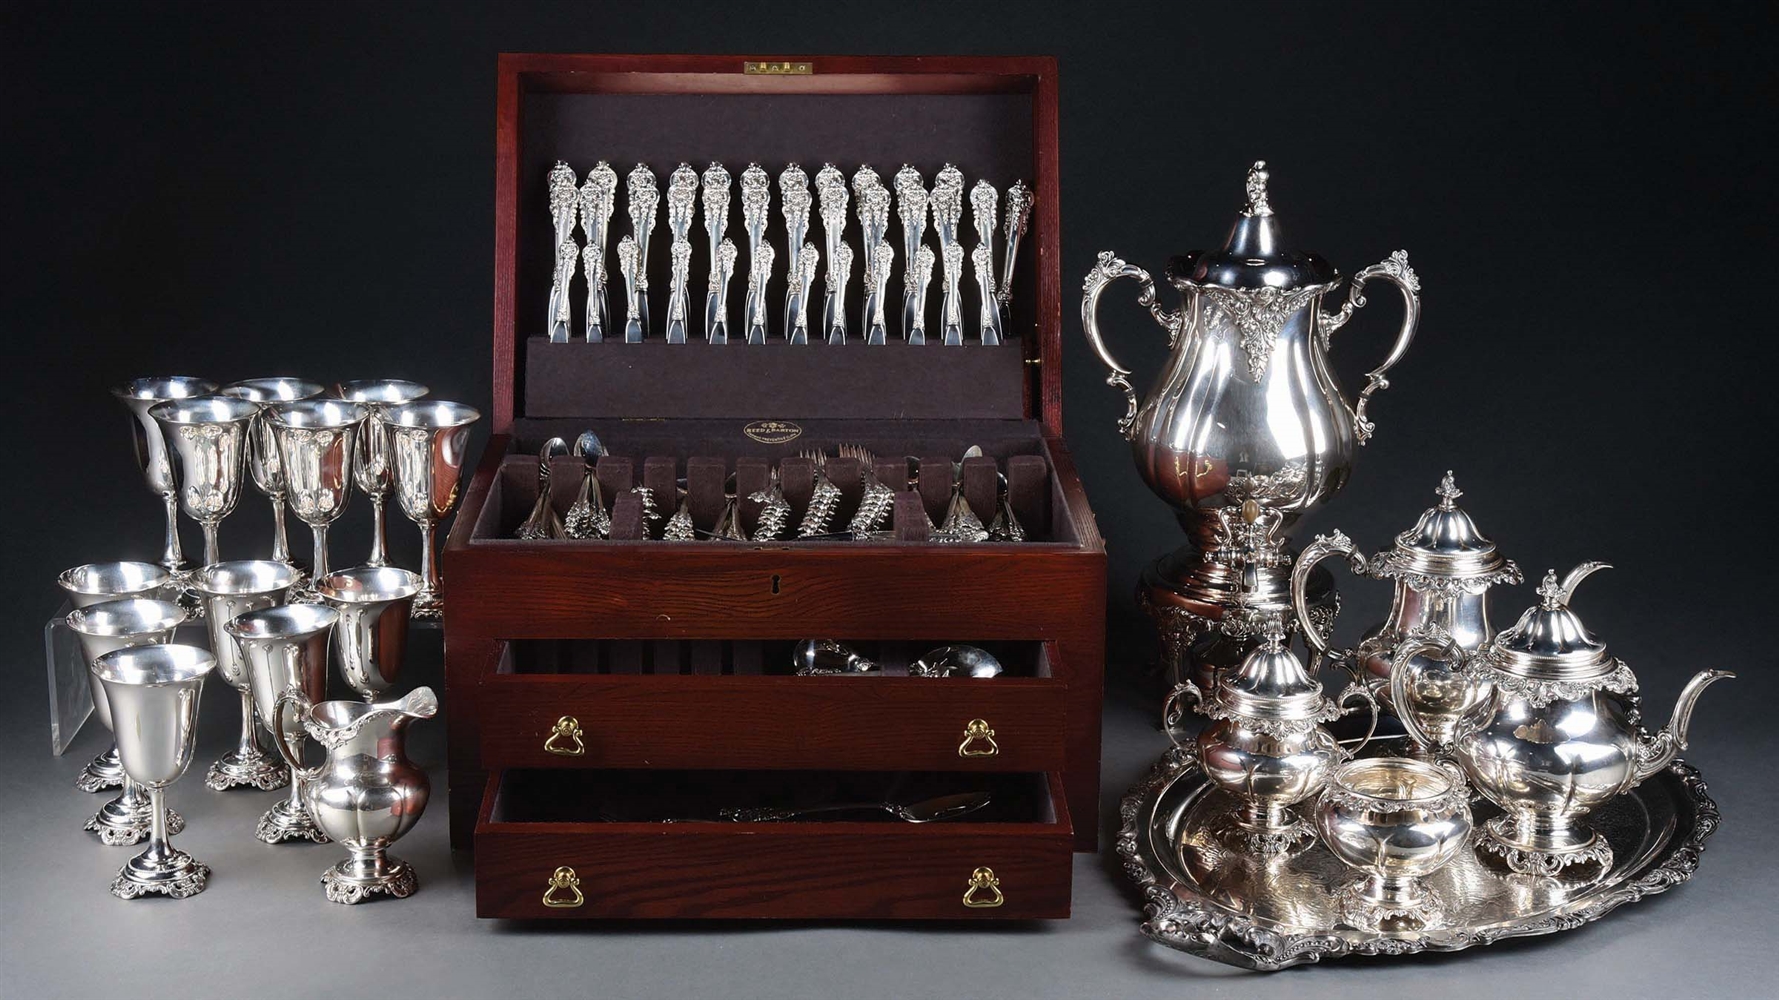 STERLING SILVER WALLACE GRANDE BAROQUE 177-PIECE STERLING SILVER LUNCH AND DINNER FLATWARE & TEA SET W/ 3-TIER CHEST.